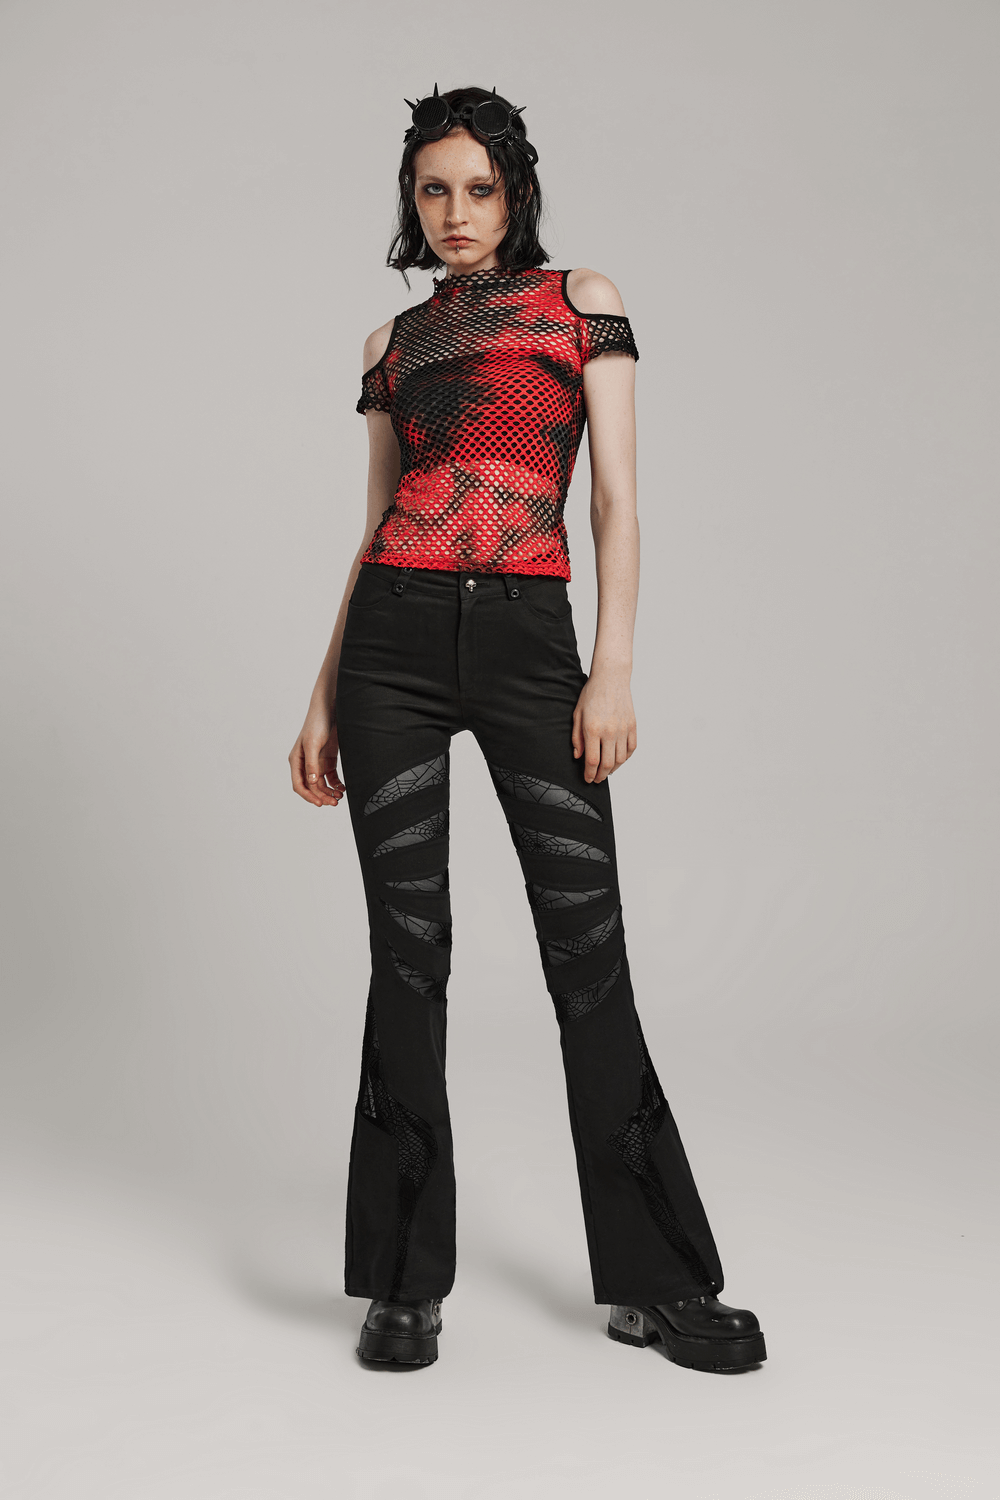 Stretch Gothic Flared Pants with Spiderweb Black Mesh